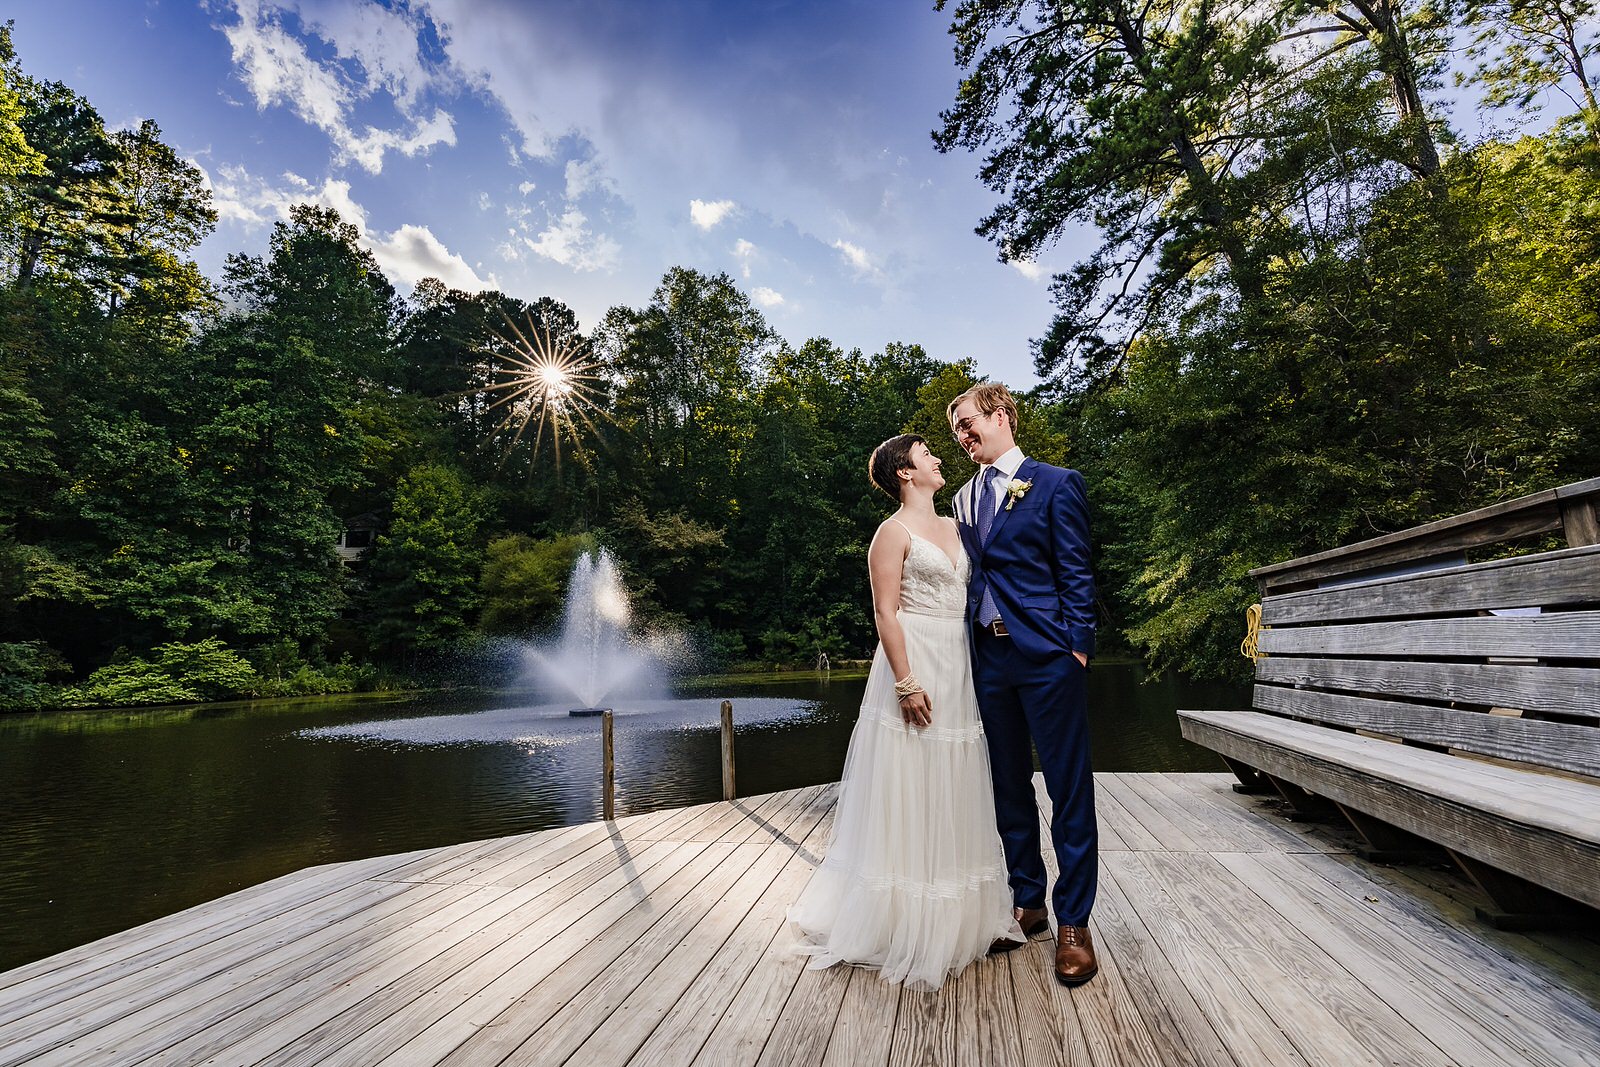 Bride and groom hug in front of a lake with a fountain